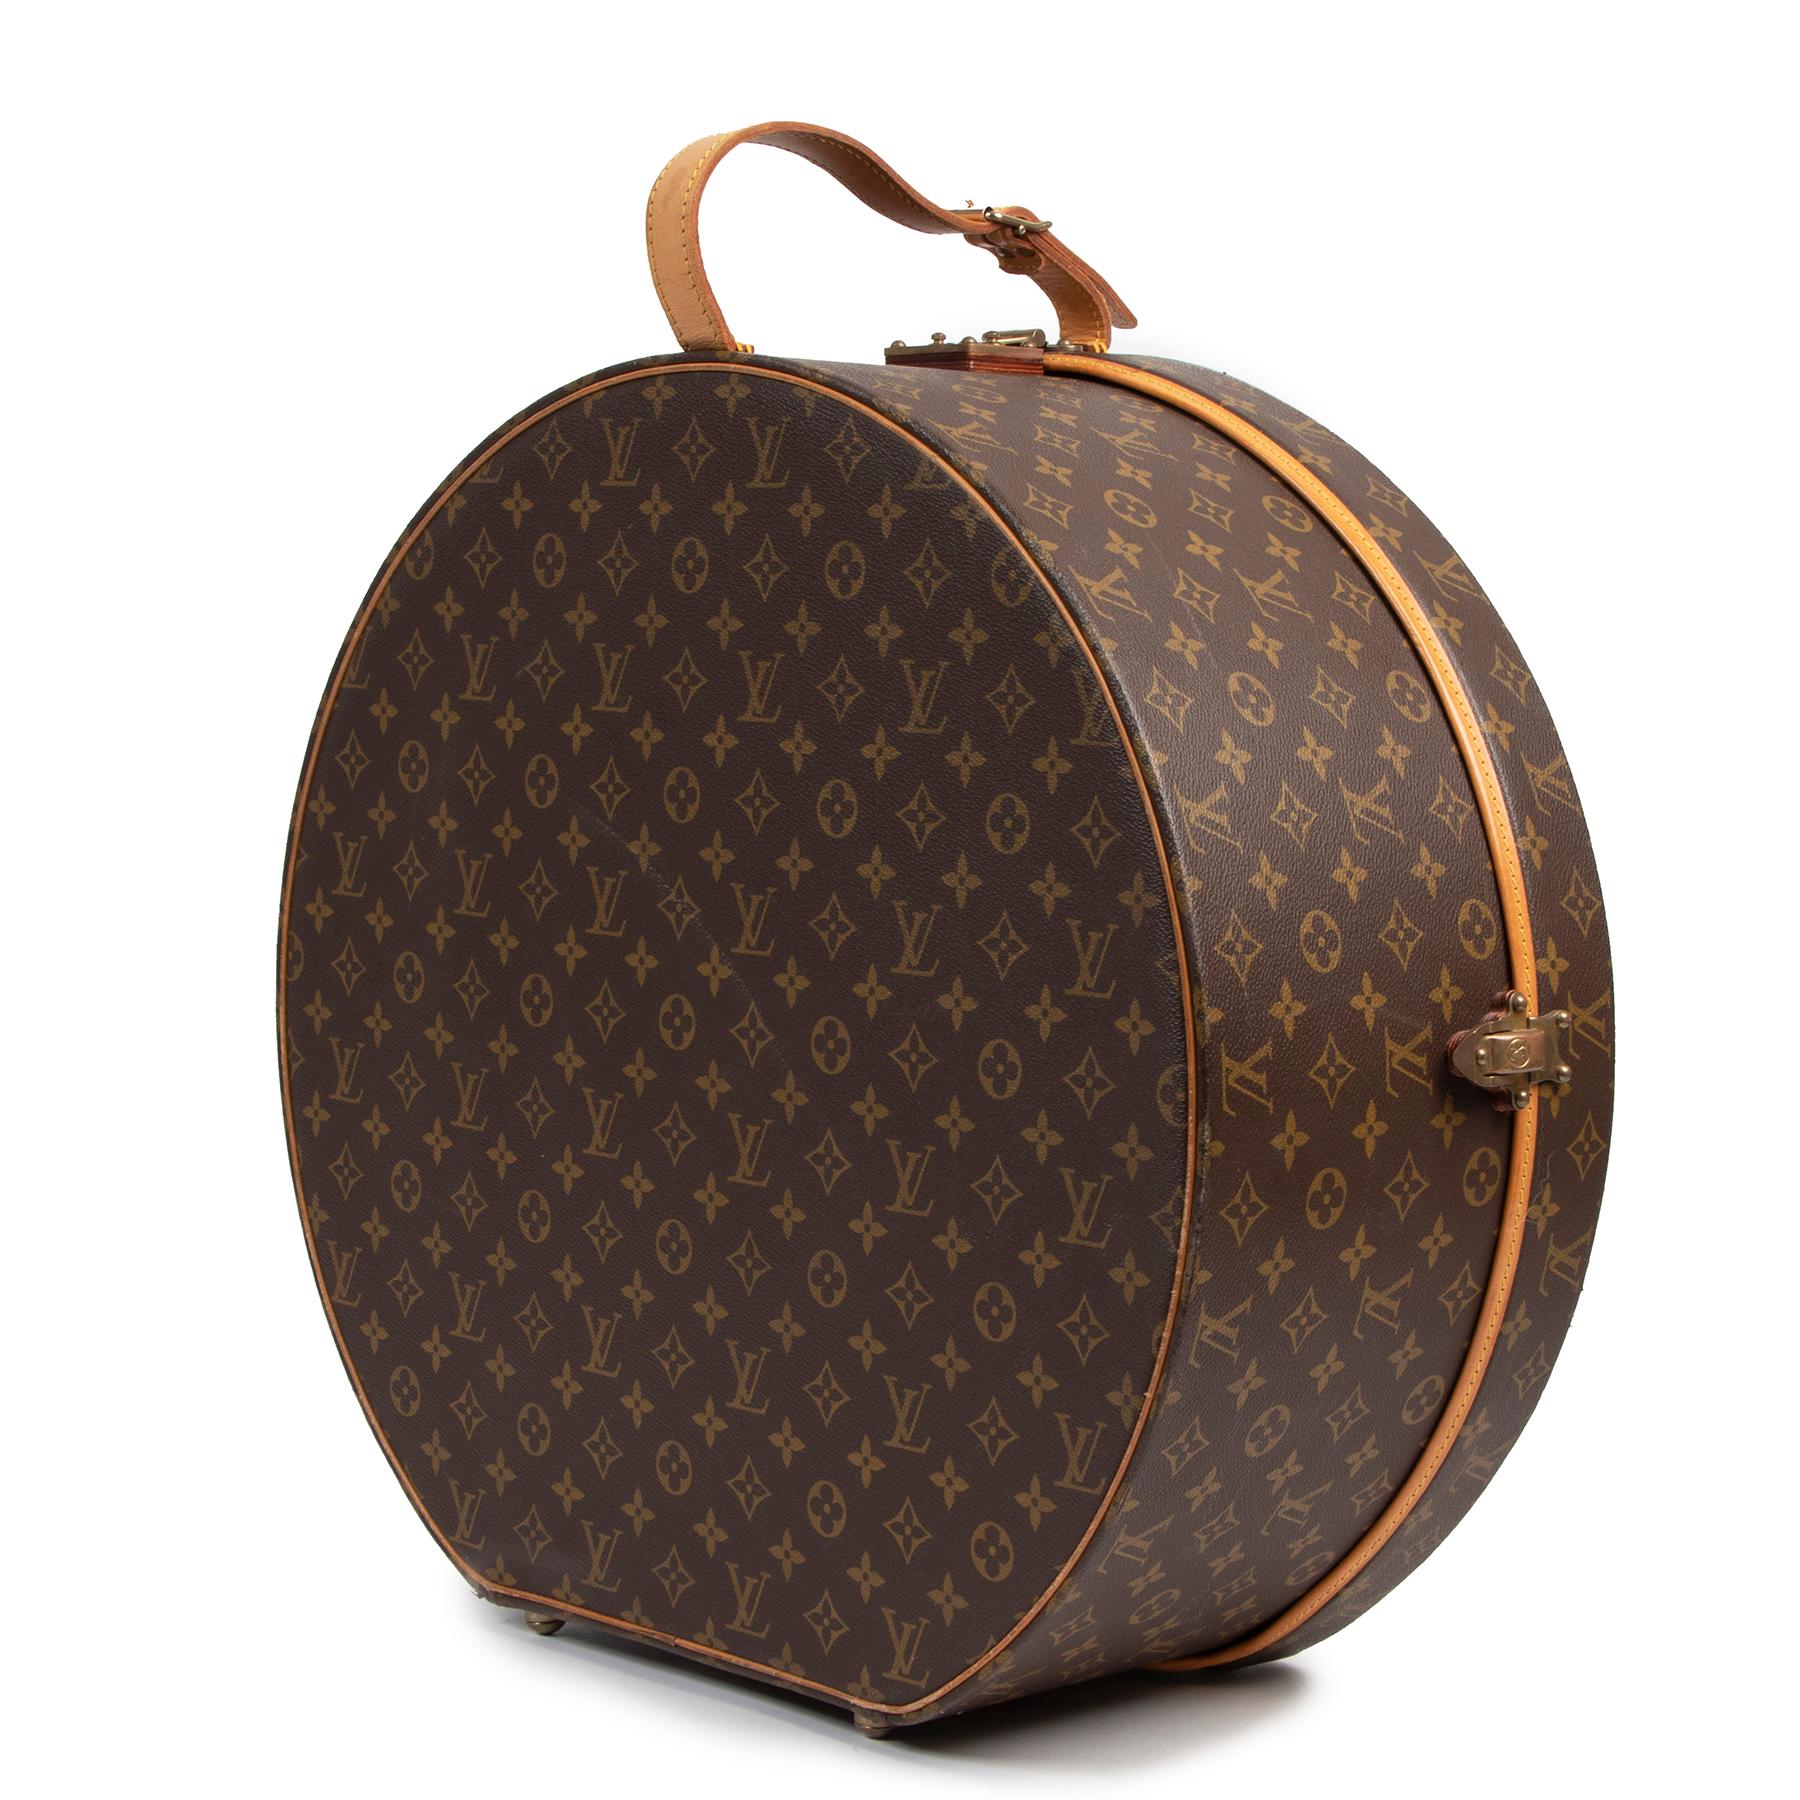 Very good condition

Louis Vuitton Boite Chapeaux 50

Give your interior an update with this chic vintage hat box .
Beautifully  crafted of Louis Vuitton monogram on coated toile canvas in the largest size. 
The bag is finished with the iconic